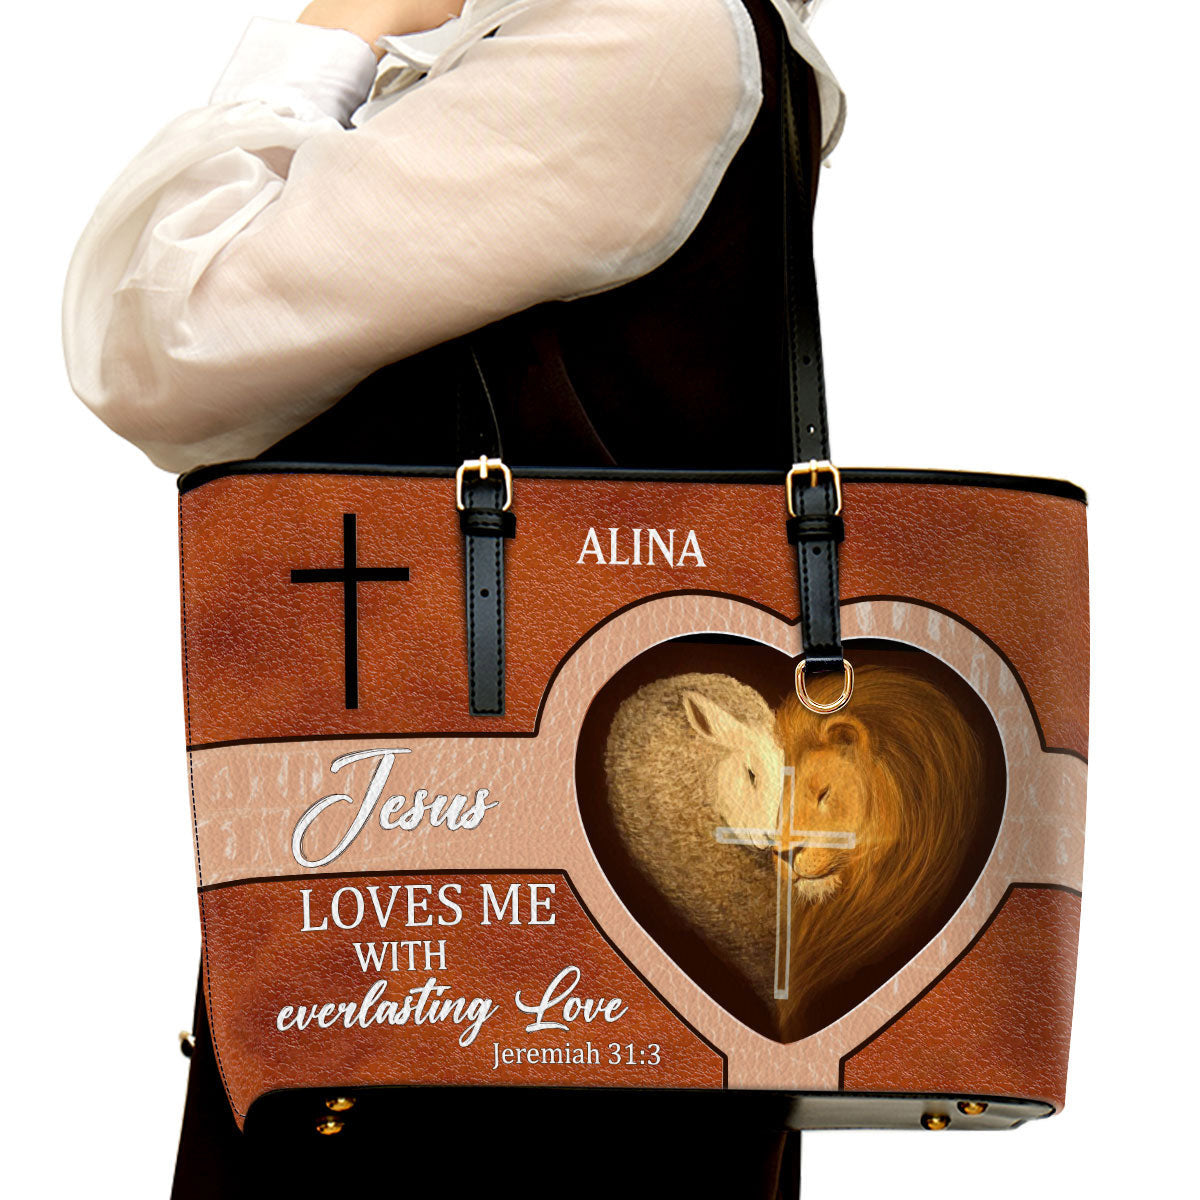 Jesus Loves Me With Everlasting Love Personalized Pu Leather Tote Bag For Women - Mom Gifts For Mothers Day